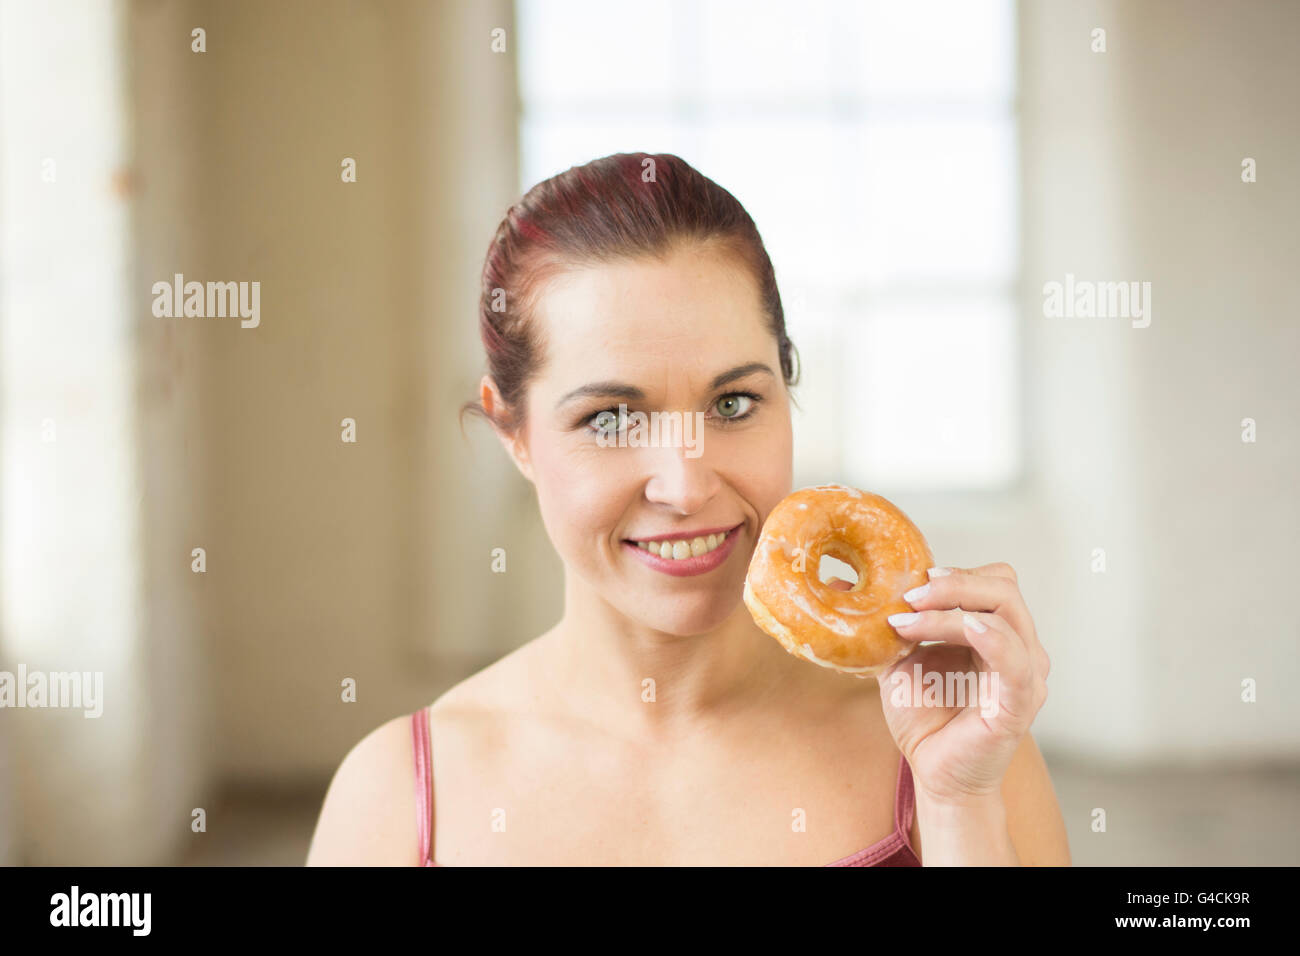 Woman eating donuts Banque D'Images